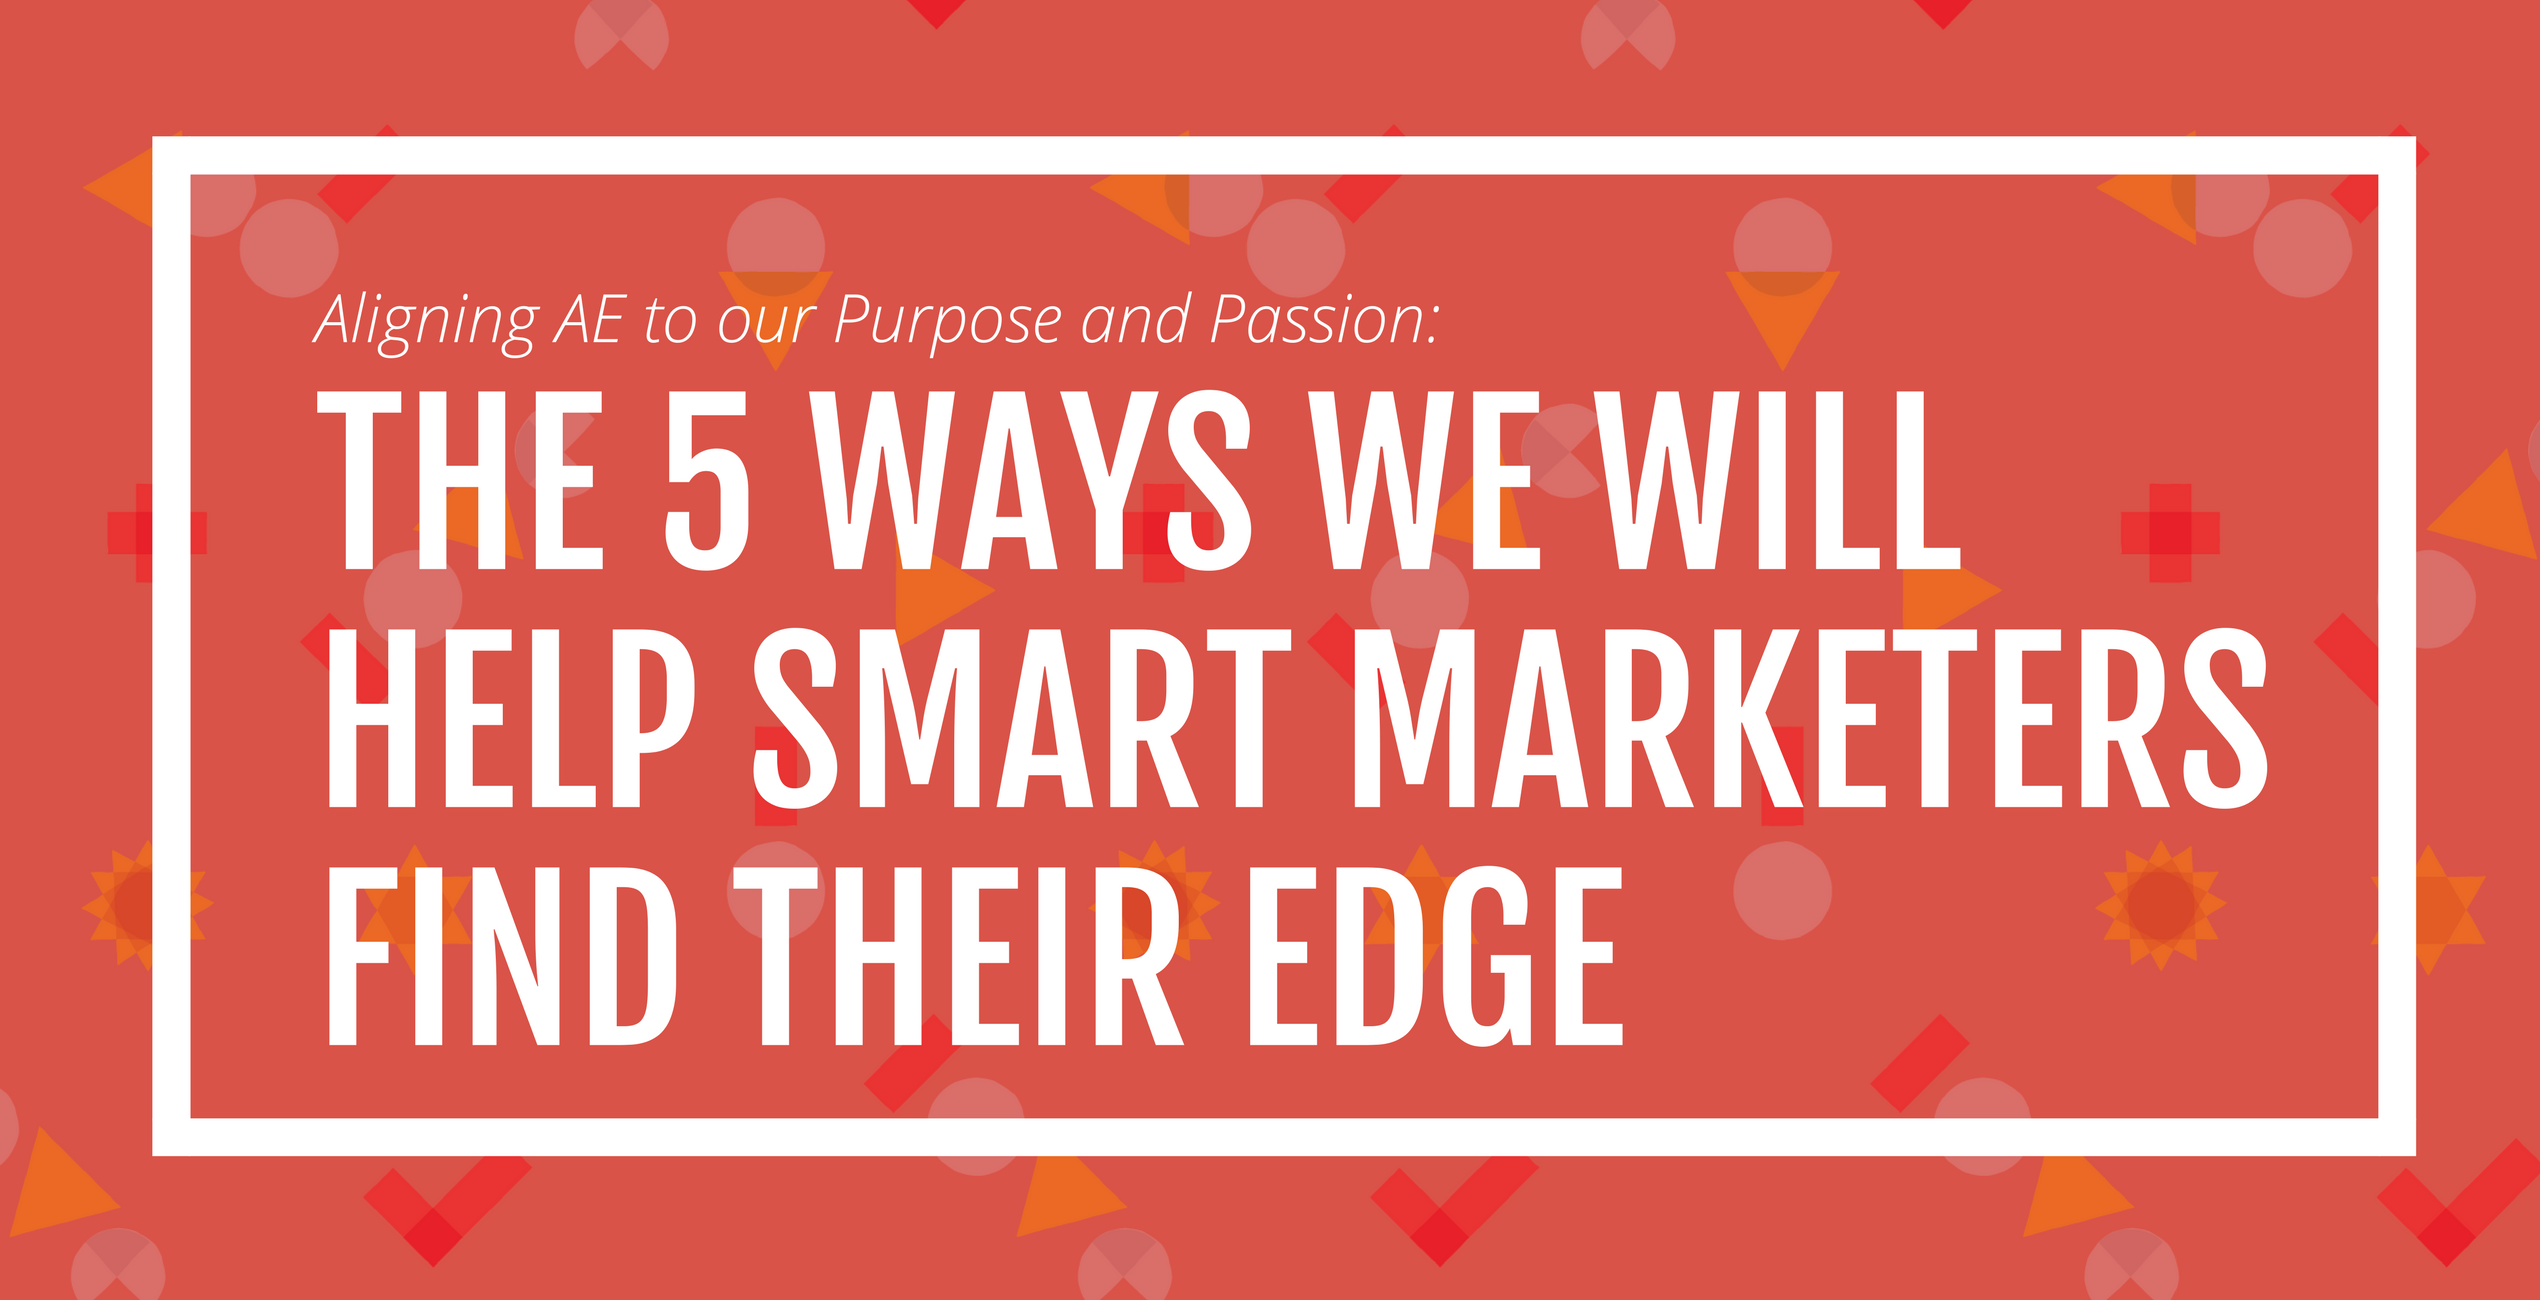 Helping smart marketers find their edge